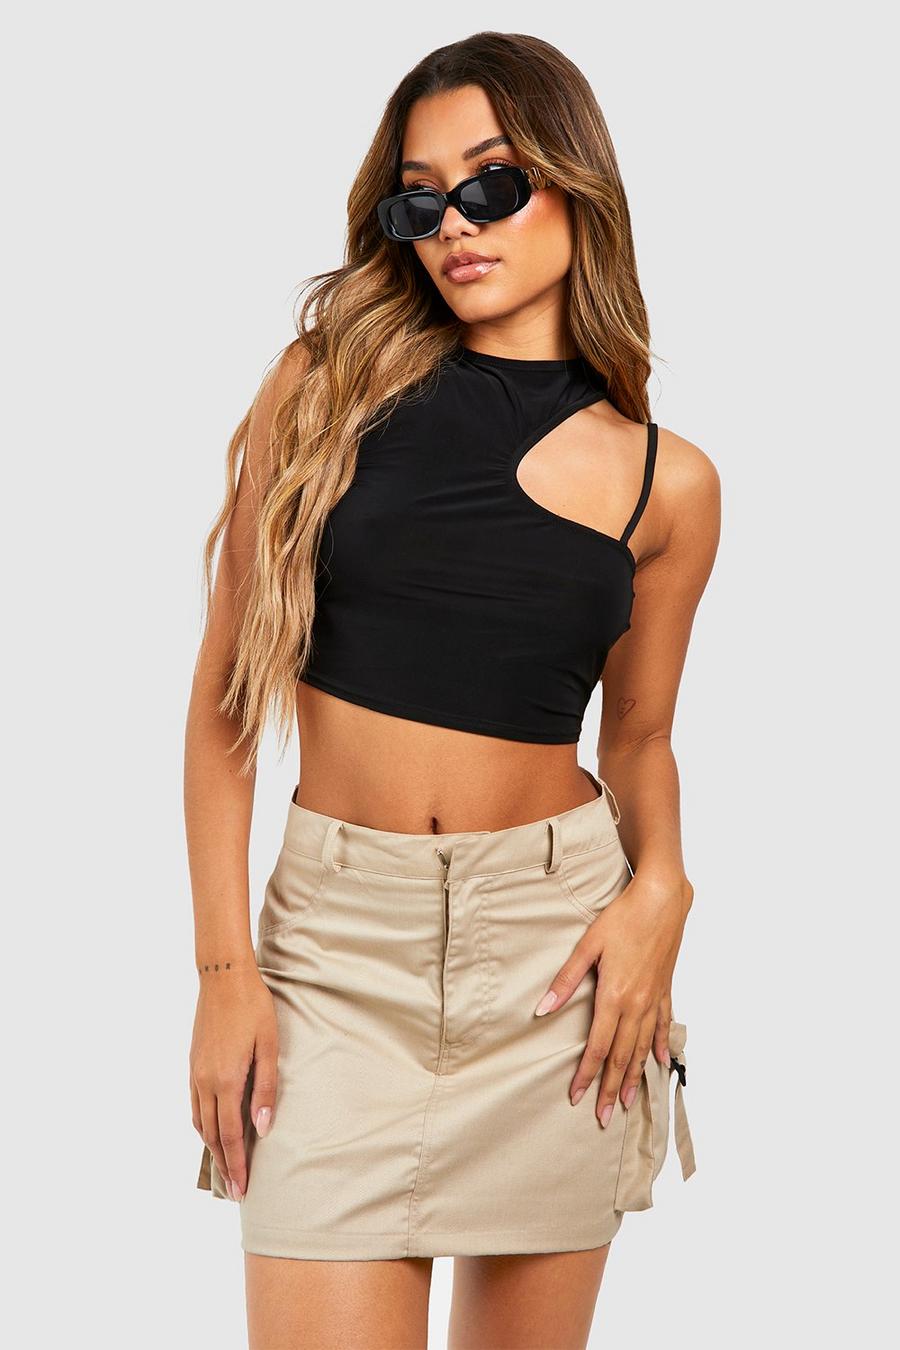 Black Cut Out Strappy Crop